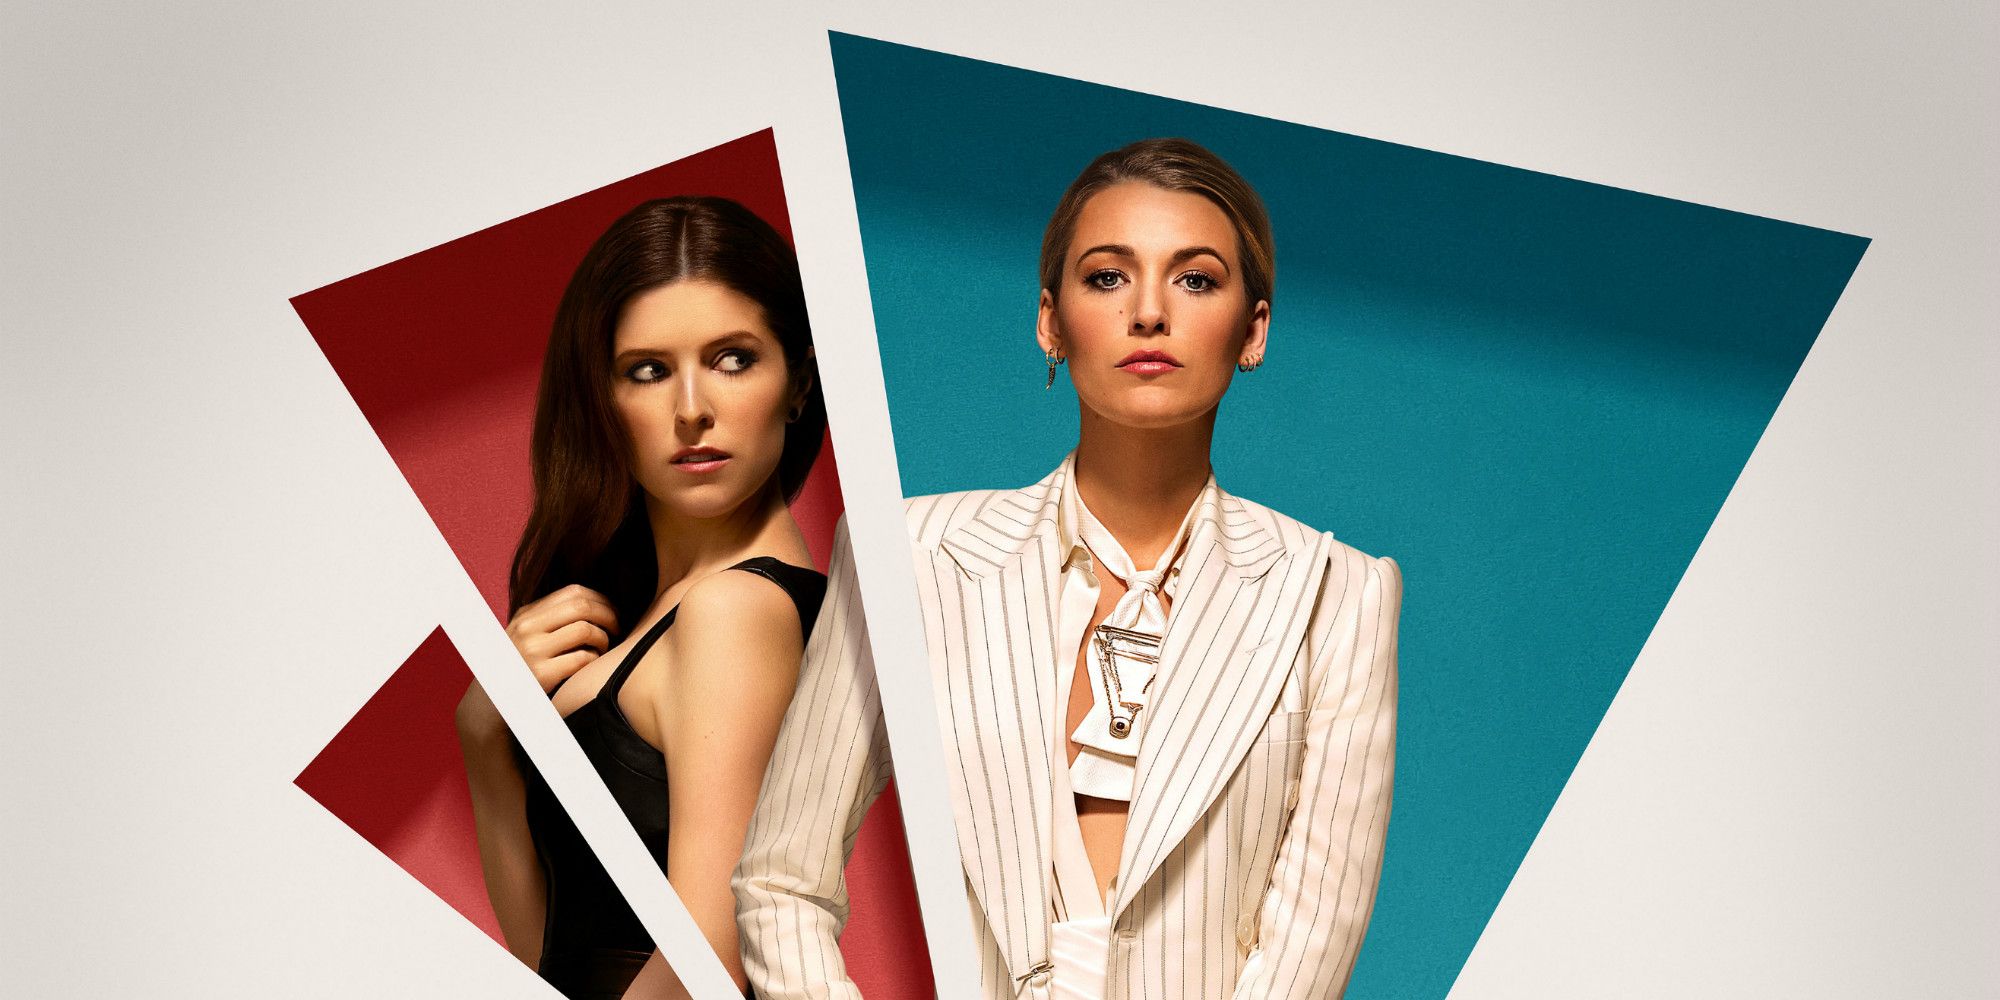 A Simple Favor Movie Photo featuring Blake Lively and Anna Kendrick side by side